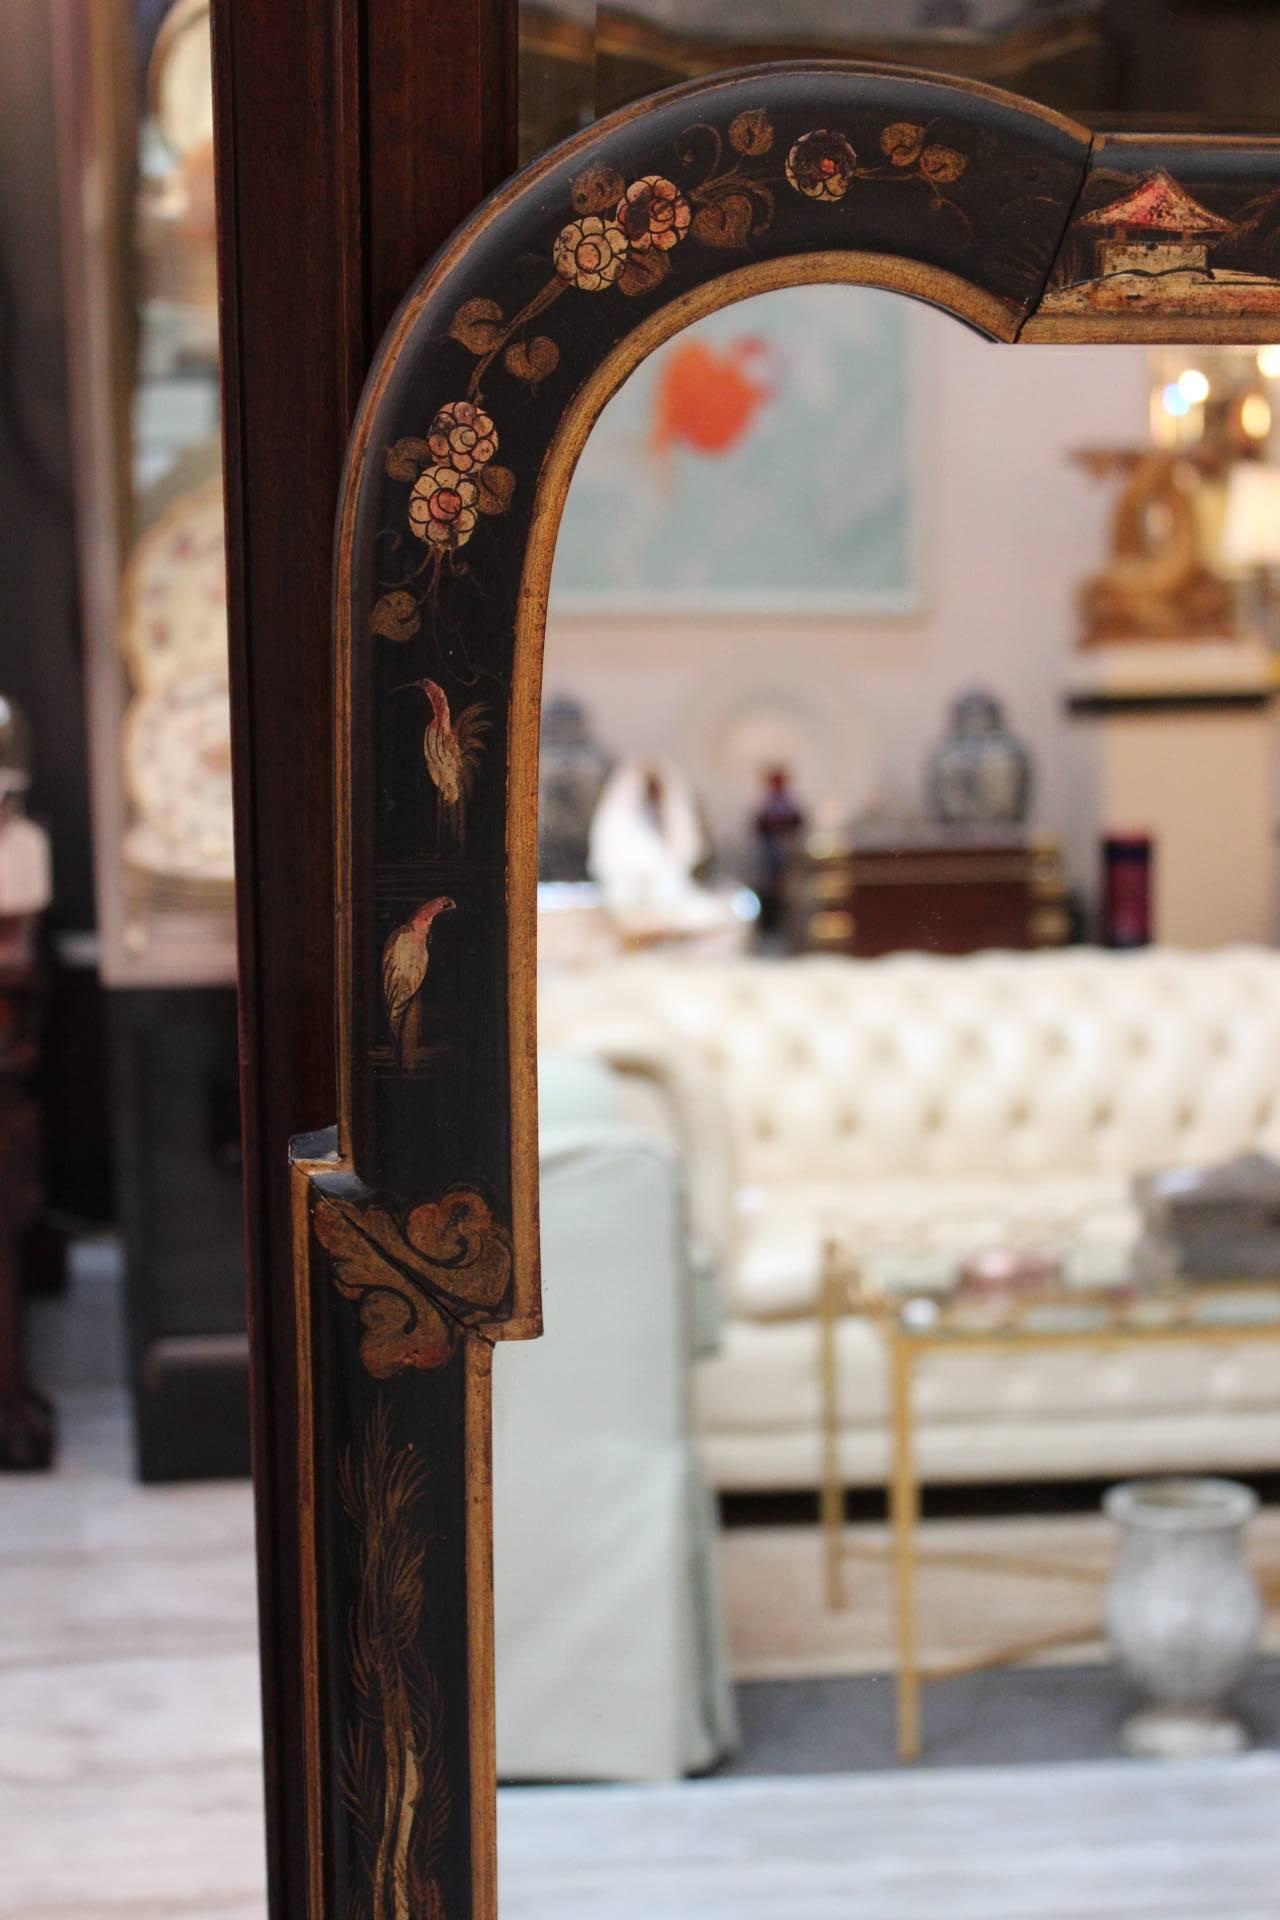 Chinoiserie wall mirror with hand-painted decoration on a black background. Made in Italy in a classic chinoiserie pattern, this mirror is a slightly narrow version of a timeless design. All original and in excellent vintage condition.